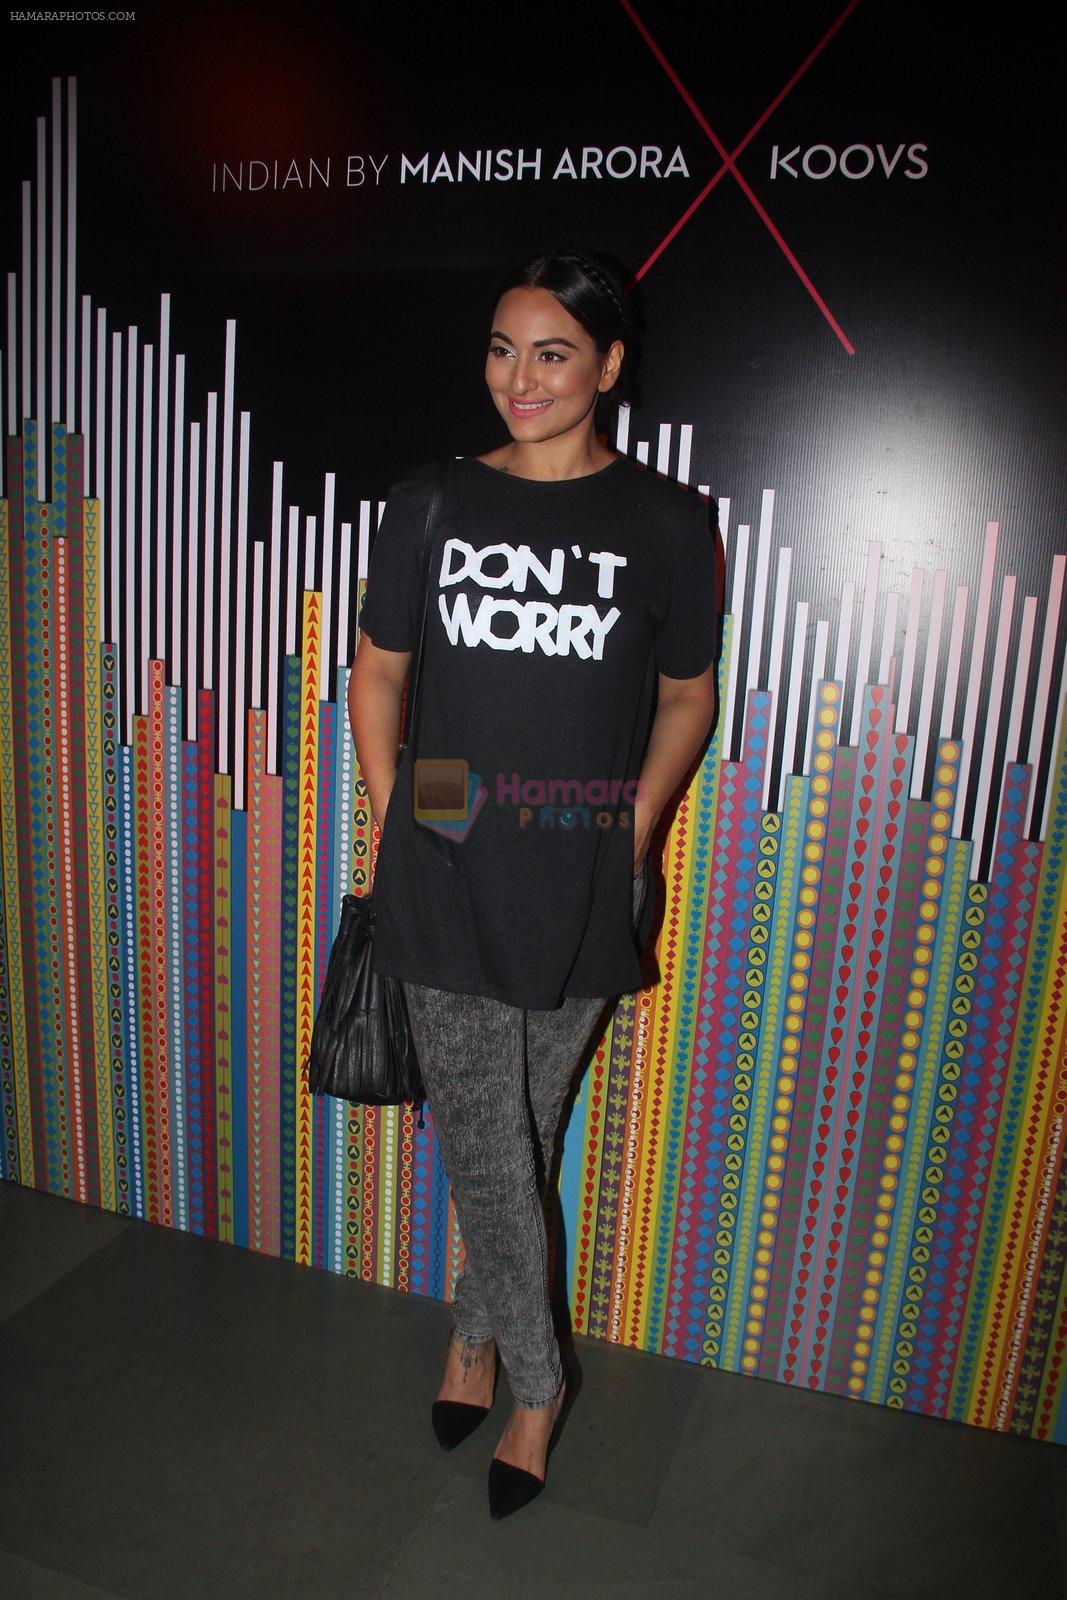 Sonakshi Sinha at Indian by Manish Arora for Koovs.com on 1st April 2016